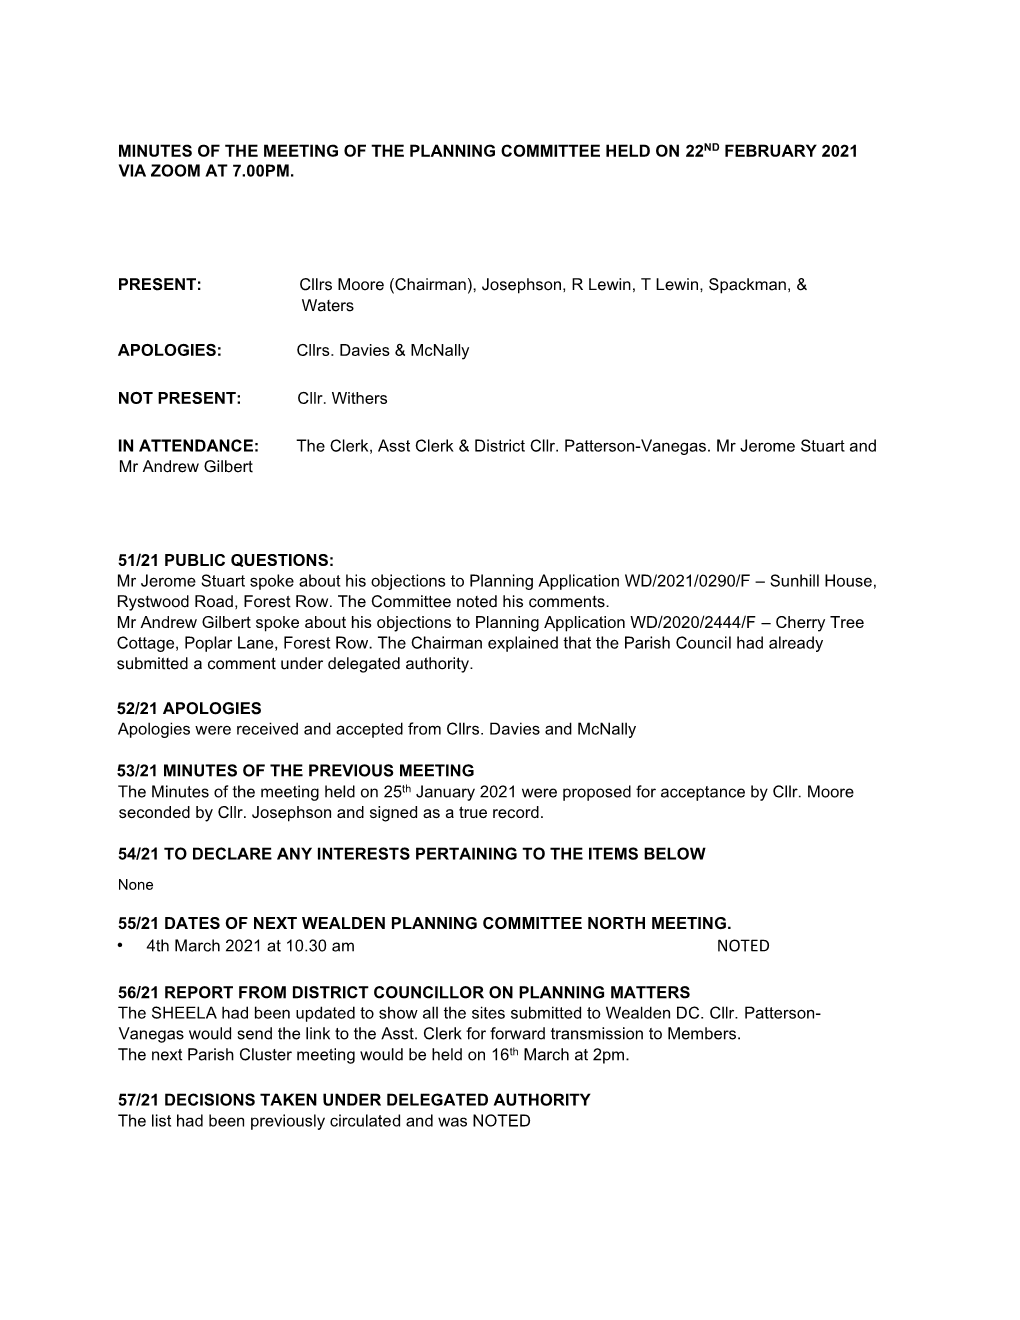 Minutes of the Meeting of the Planning Committee Held on 22Nd February 2021 Via Zoom at 7.00Pm